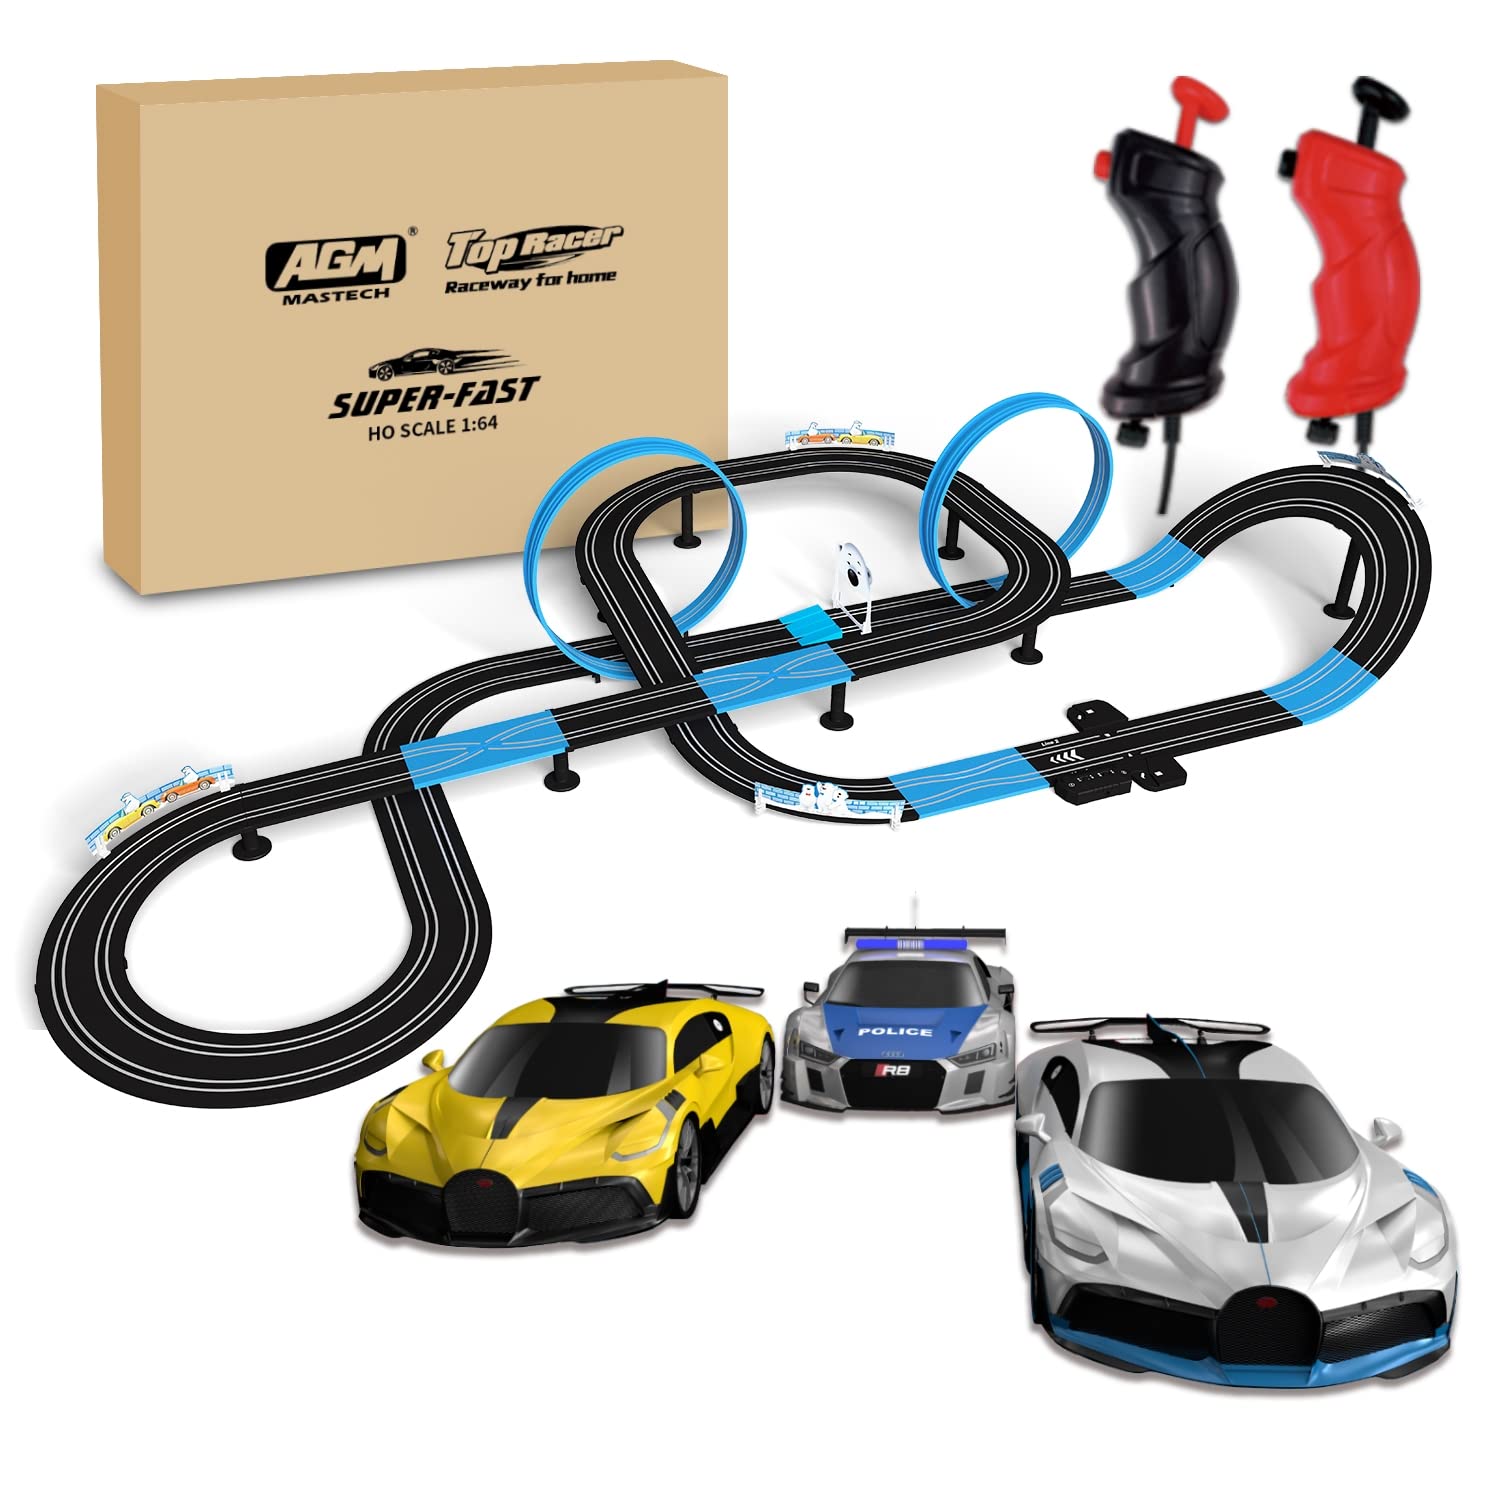 AGM MASTECH AgM MASETcH High-Speed Series Slot car Dual Race Track Set MR-10L 1:64 Scale with 3 cars & Lap counter